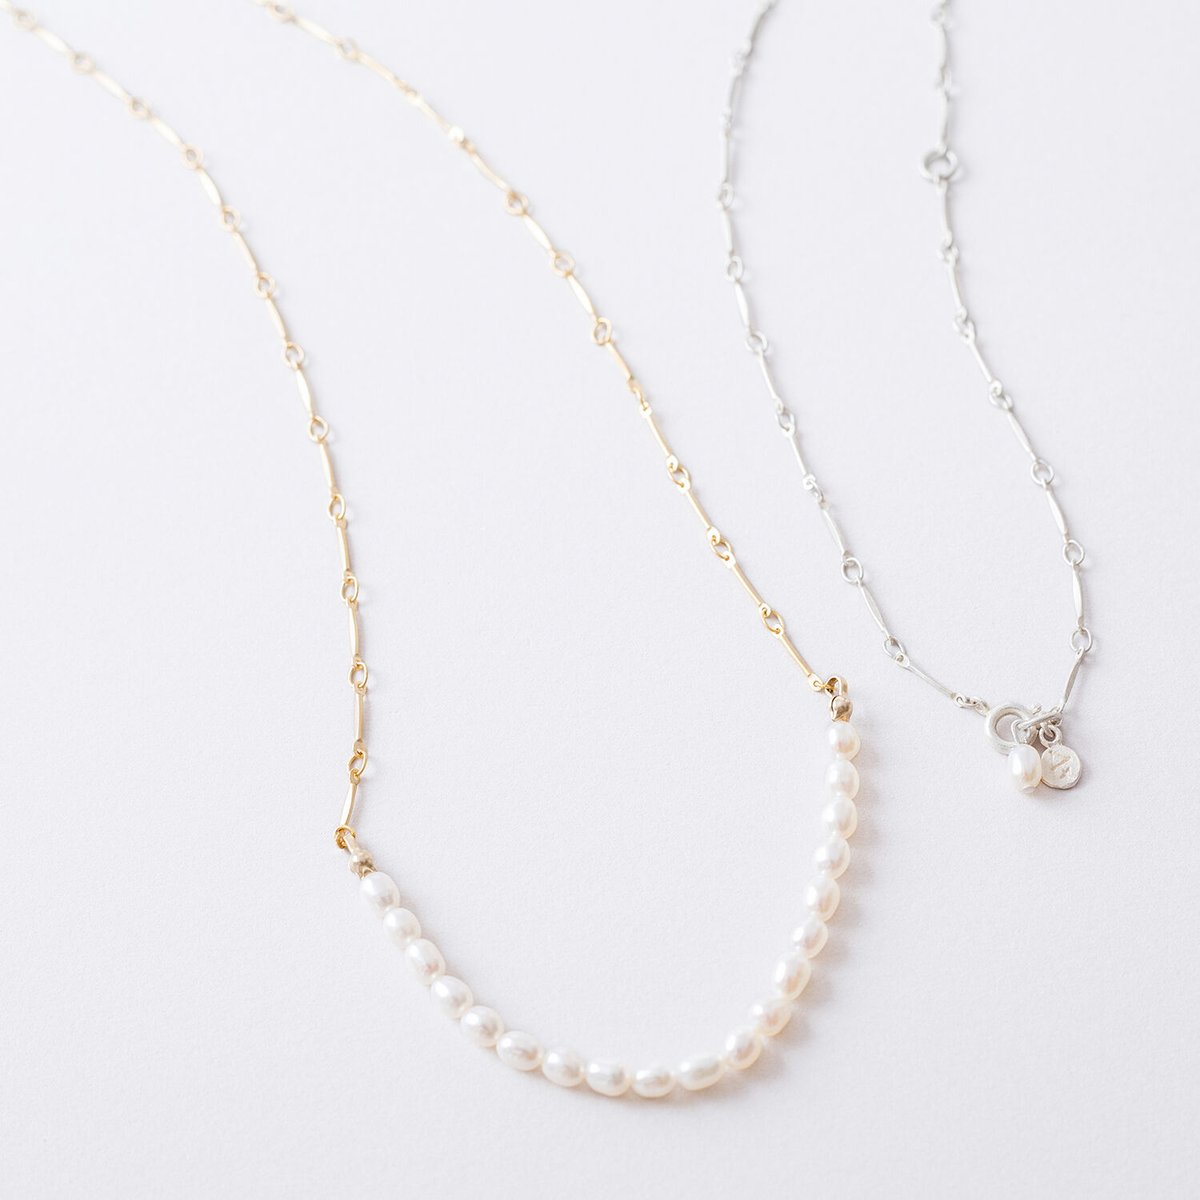 SSN138：プレスチェーン×淡水パールネックレス / Pressed chain× freshwater pearl Necklace